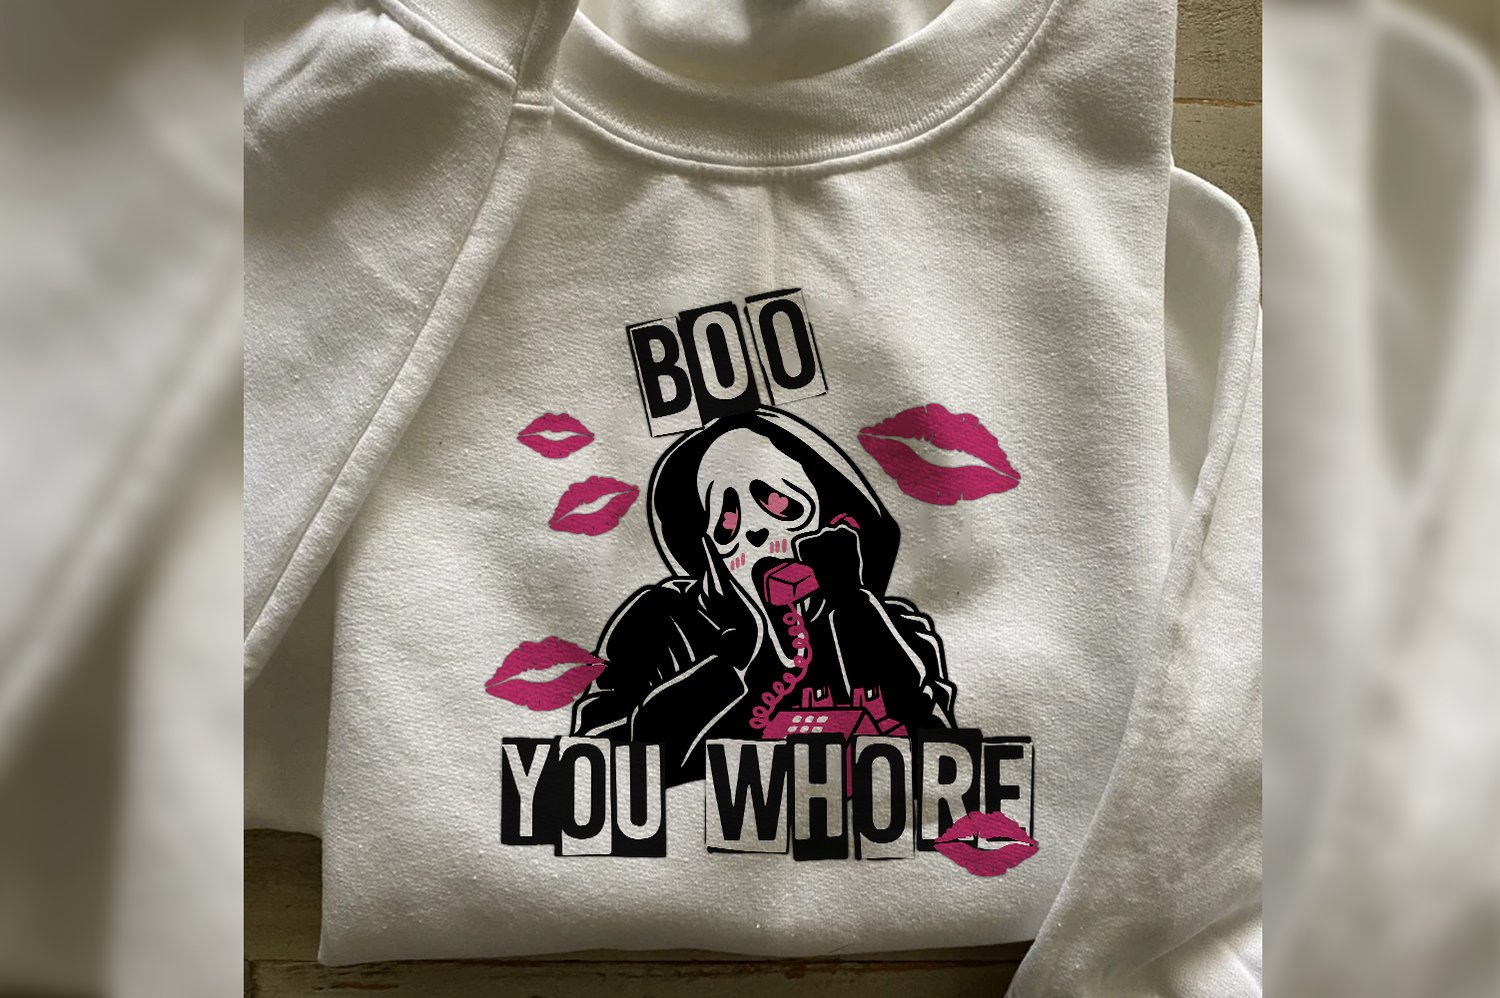 Wholesale Ghostface Boo You Whore Mean Girls Sticker for your store - Faire